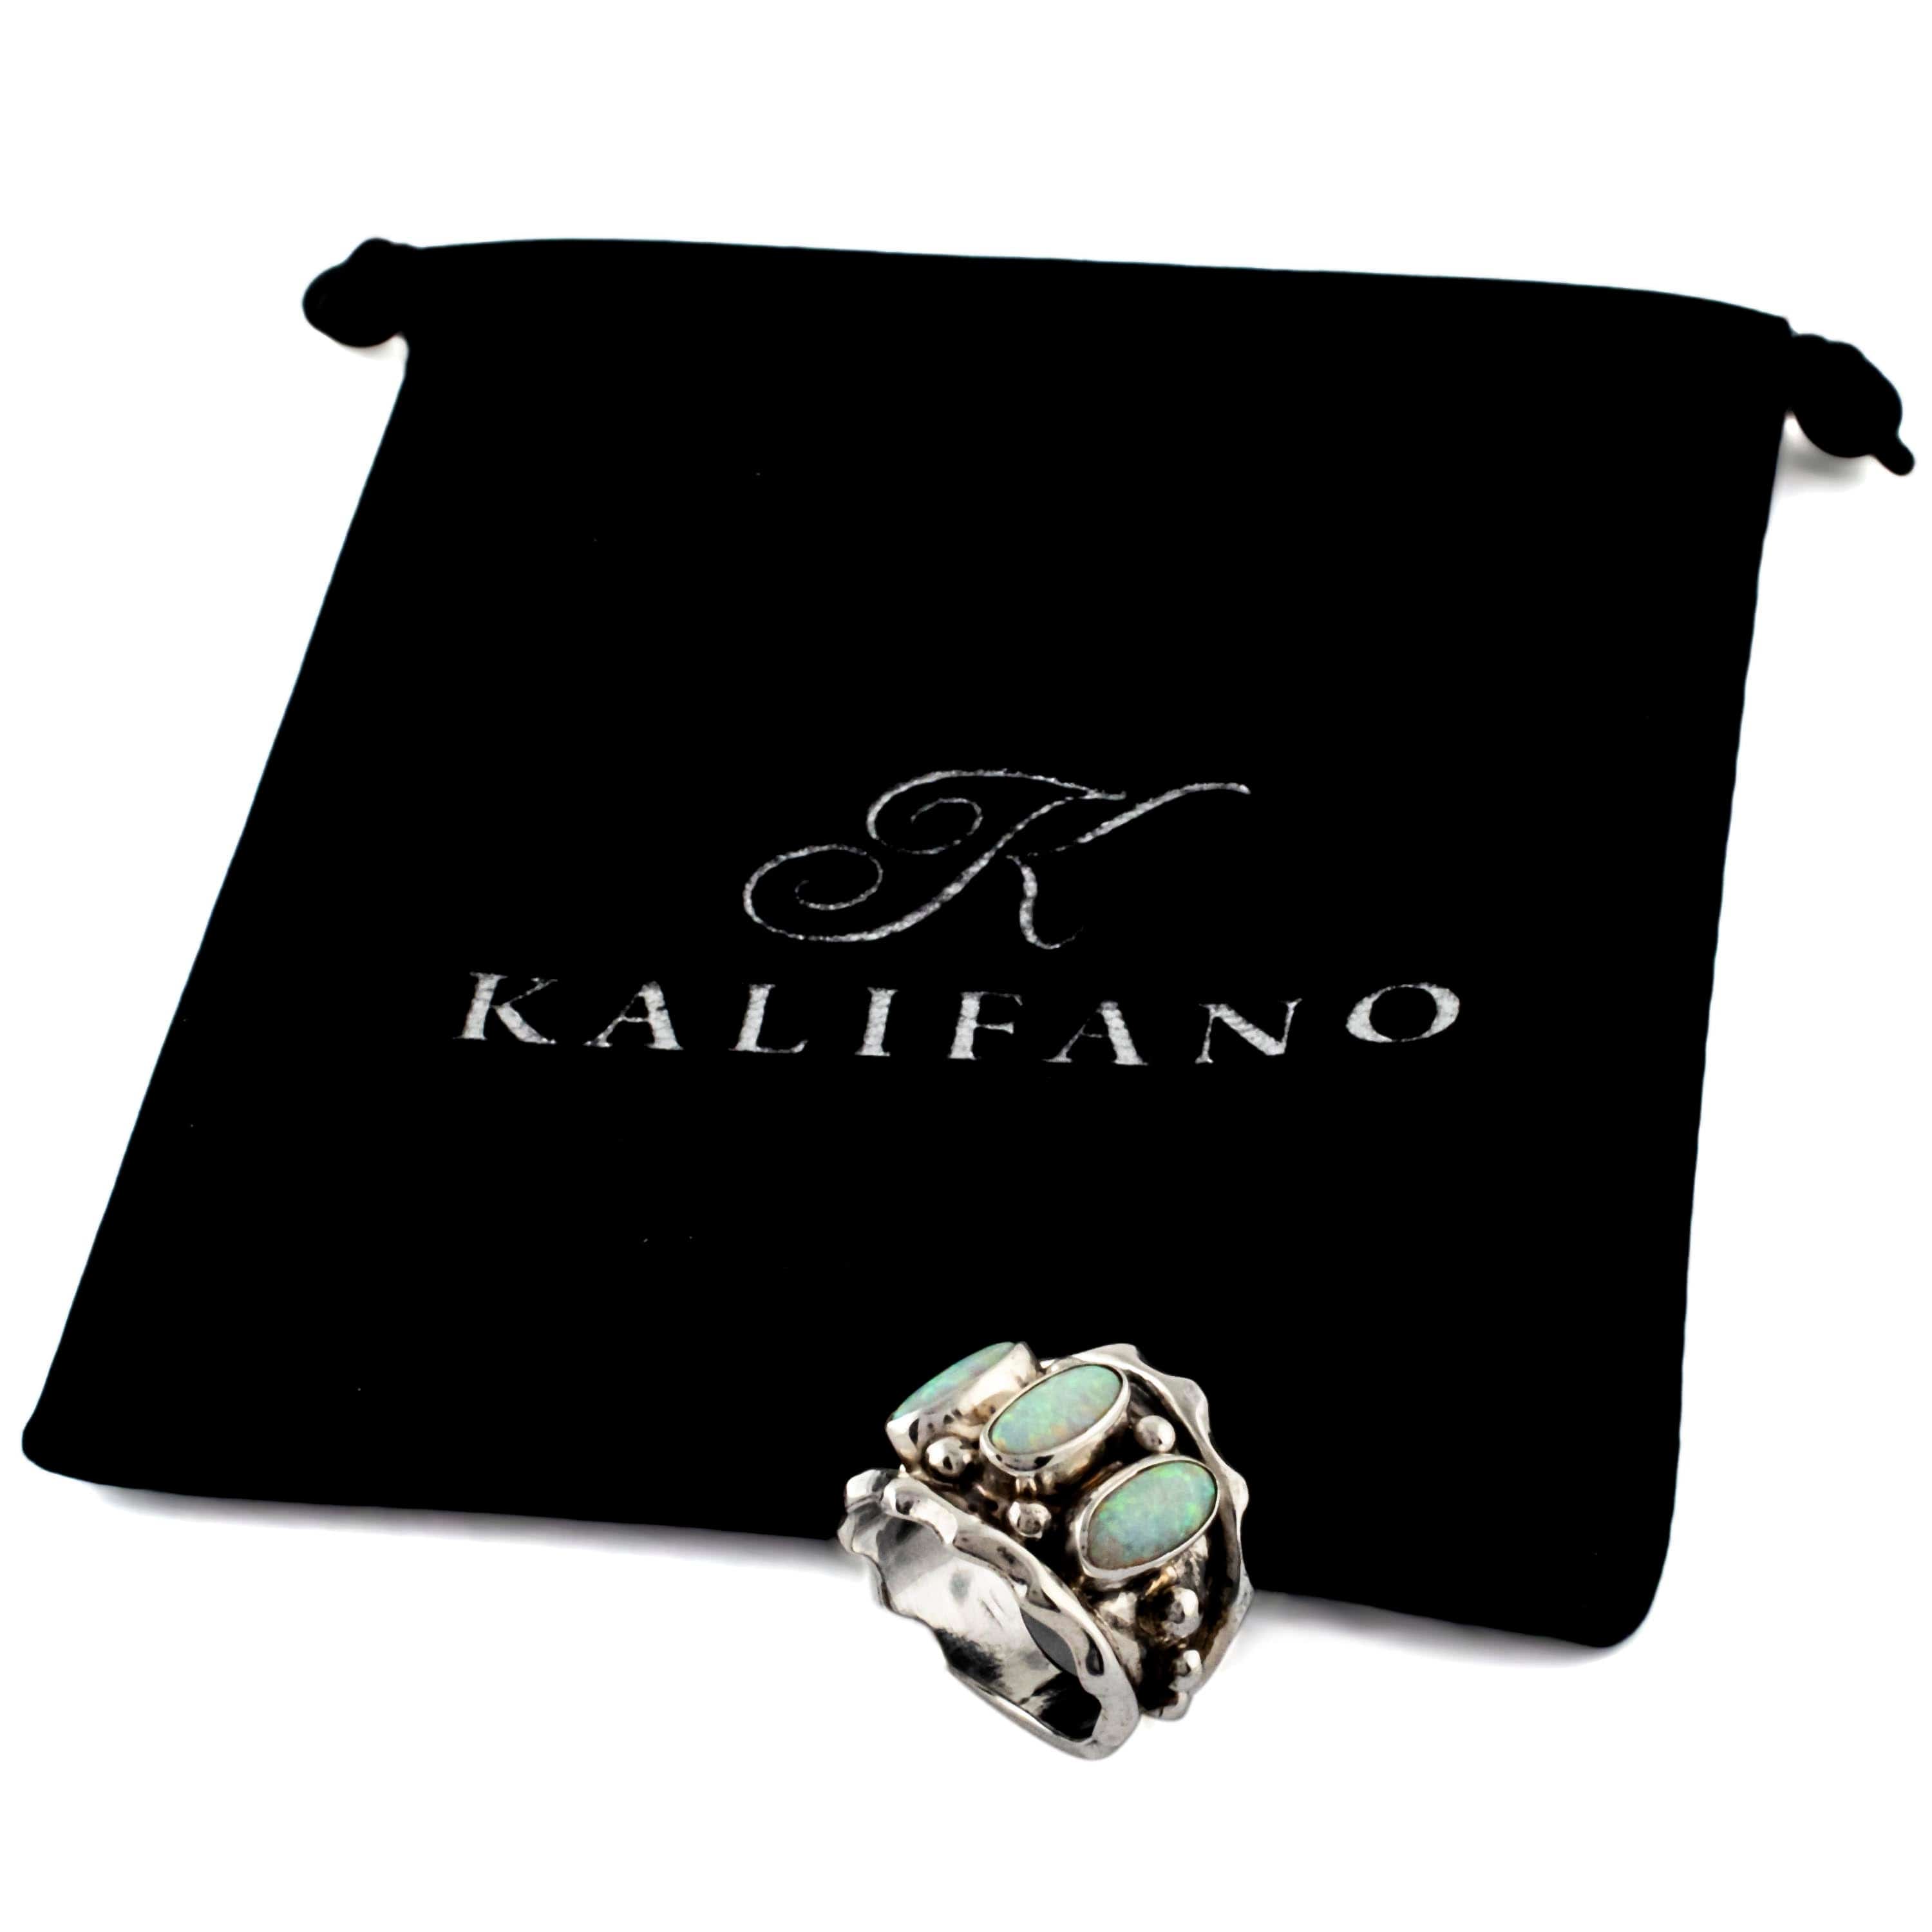 Kalifano Native American Jewelry Running Bear Triple White Opal USA Native American Made 925 Sterling Silver Ring